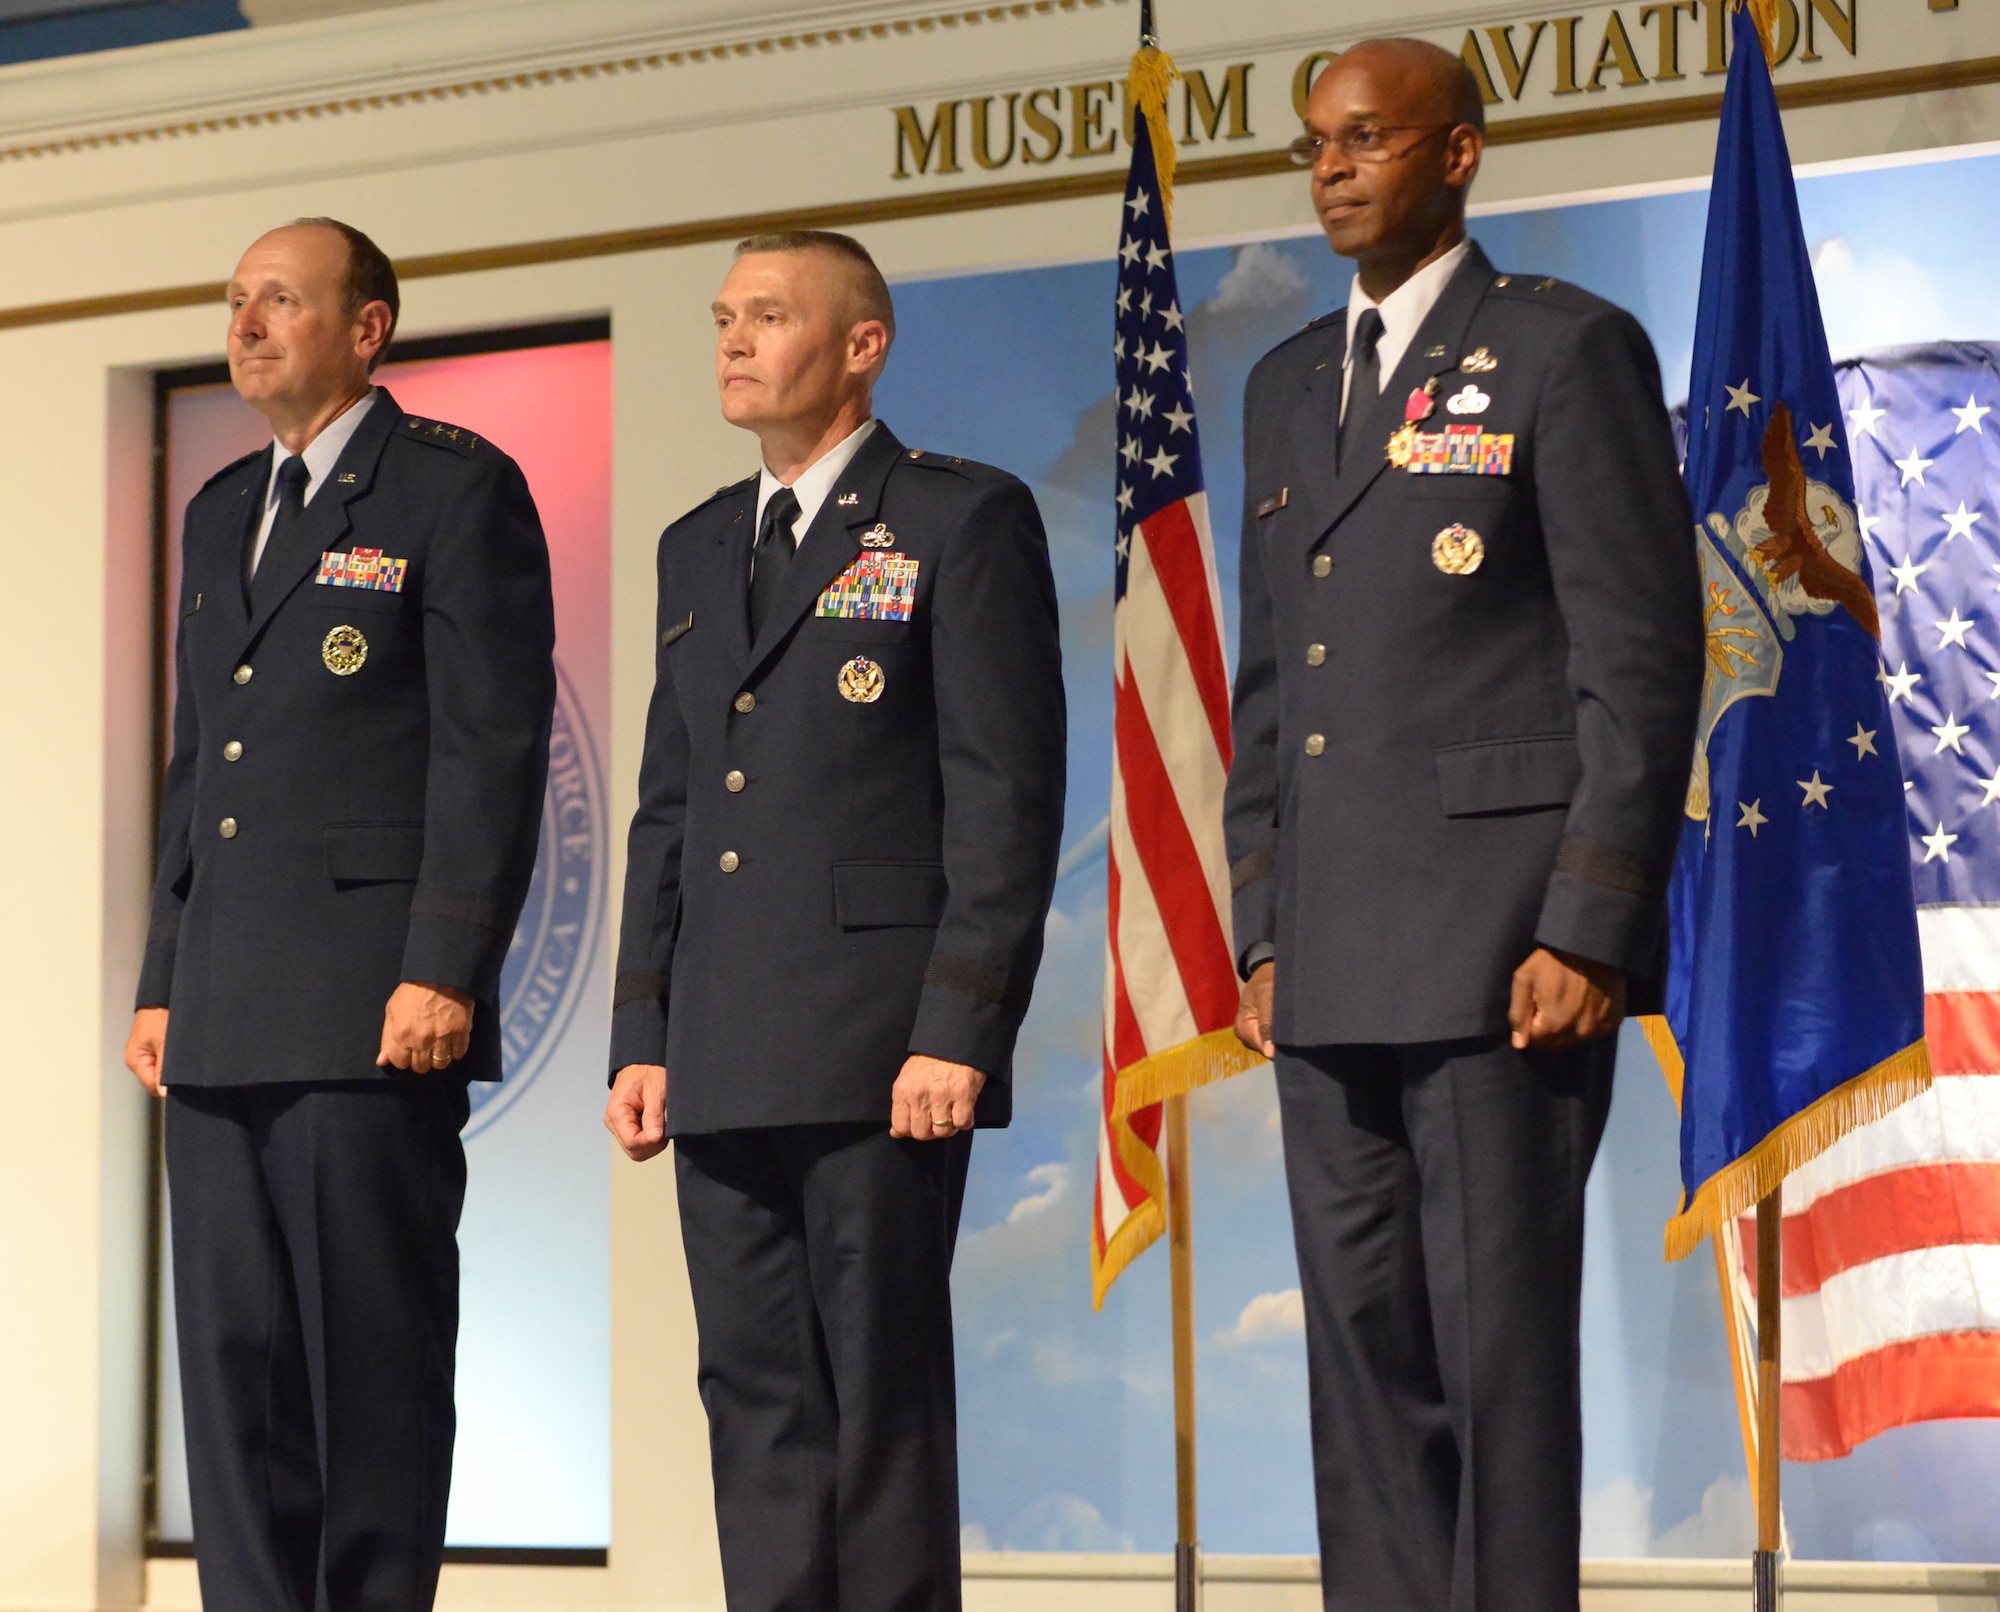 From left, Lt. Gen. Bruce Litchfield, Air Force Sustainment Center Commander, Brig. Gen. Walter Lindsley, Warner Robins Air Logistics Complex commander and Brig. Gen Cedric George, outgoing WR-ALC Complex commander, during the change-of-command ceremony August 11, 2014. (US. Air Force photo by Ray Crayton)